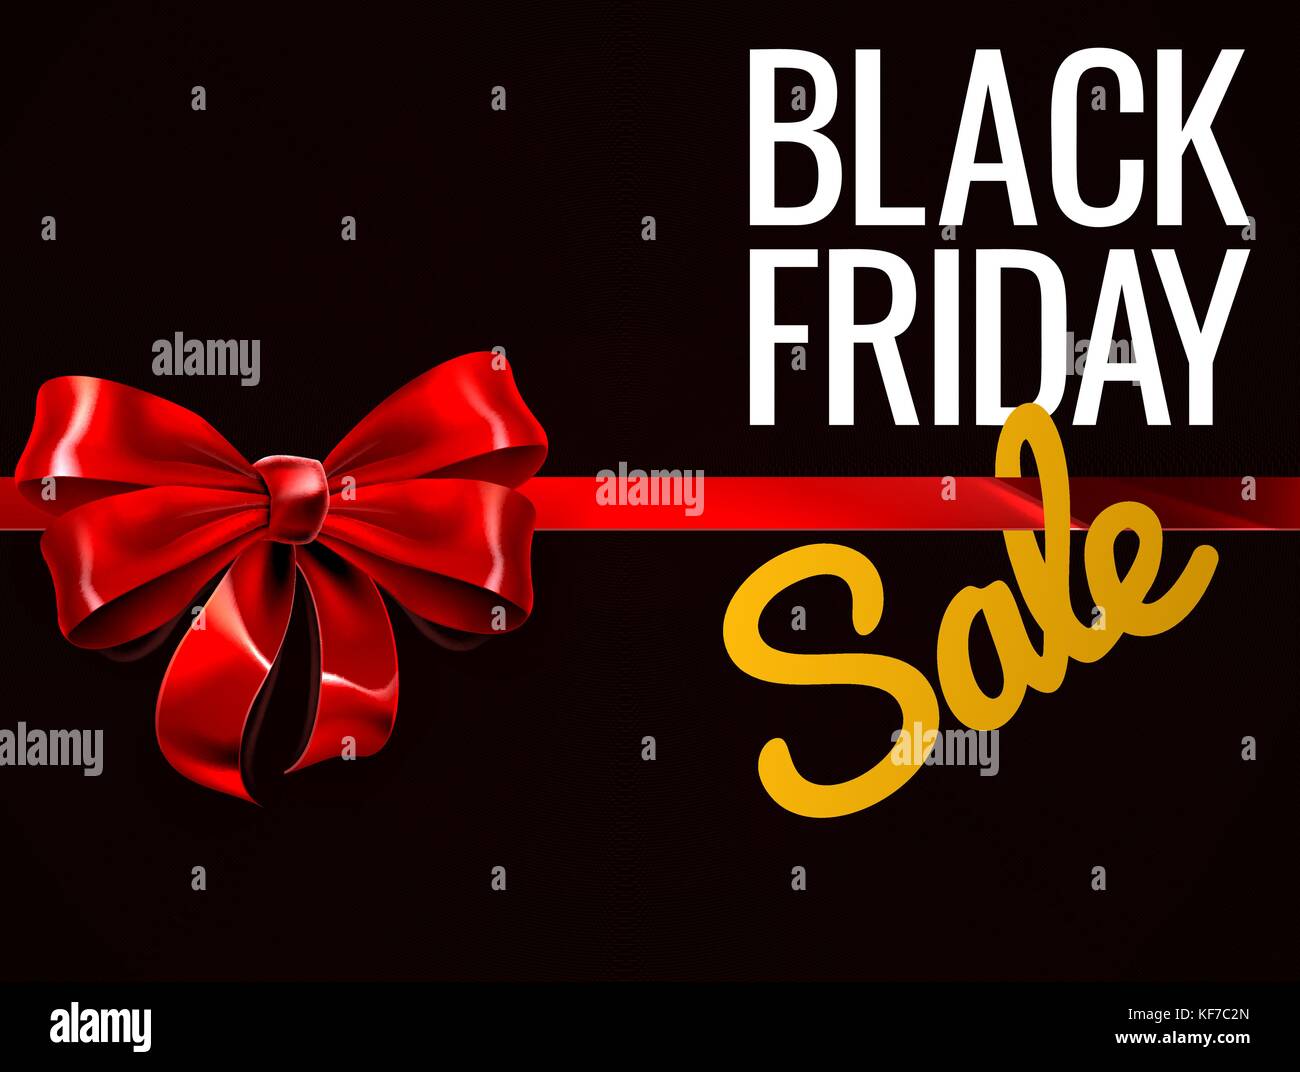 Black Friday Sale Red Gift Bow Sign Stock Vector